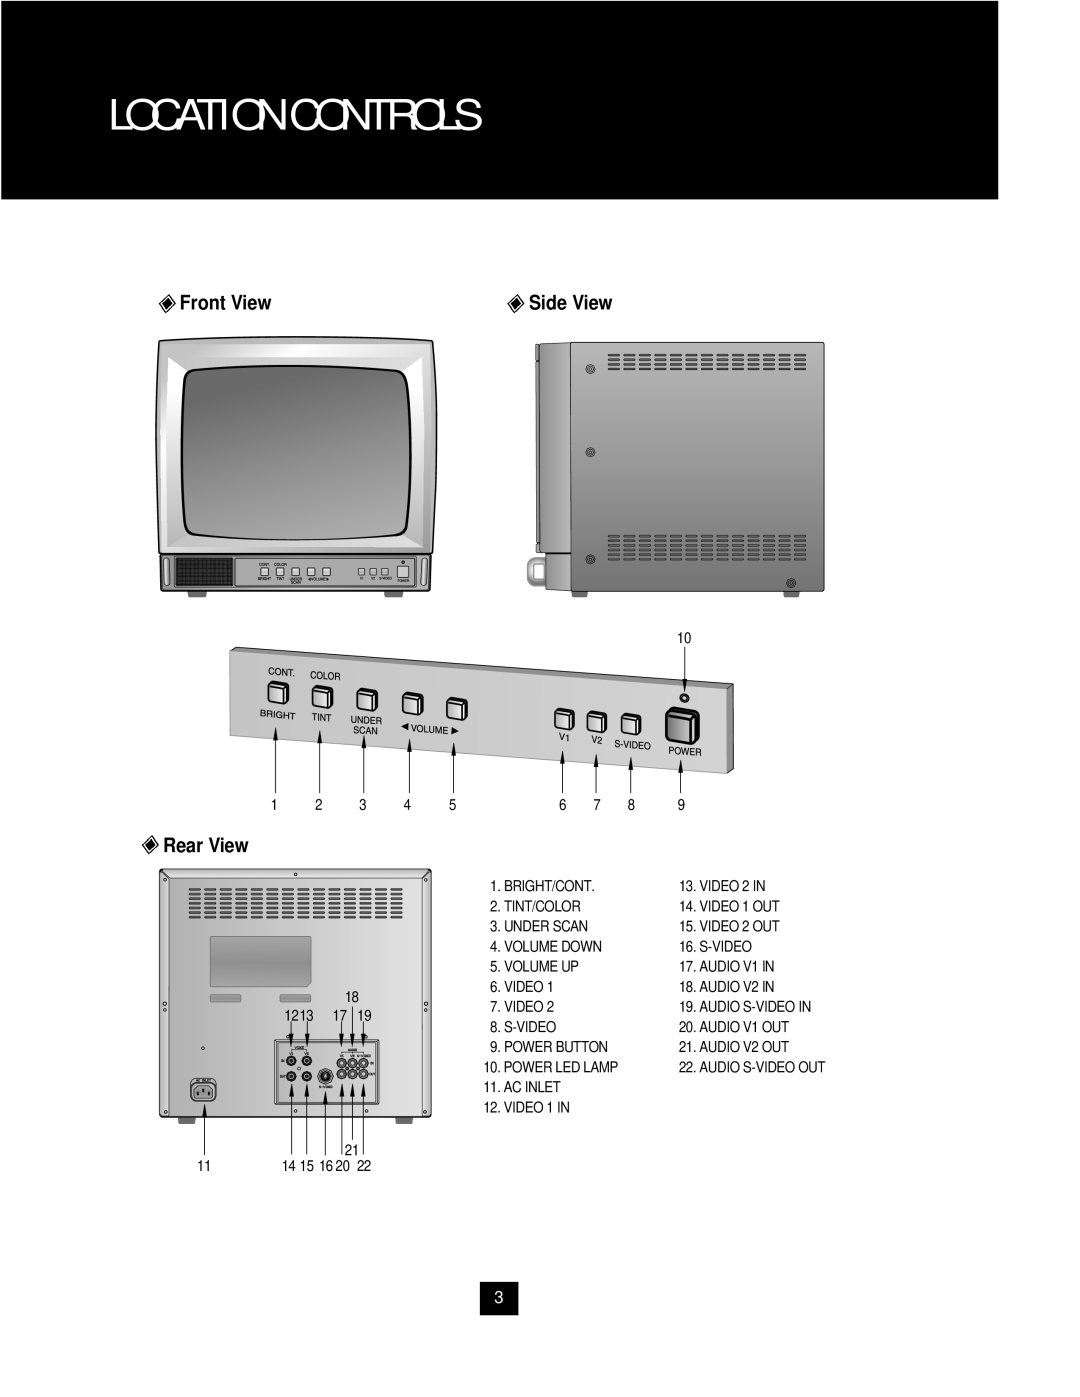 Samsung SAM-14MV manual Location Controls, Front View, Side View, Rear View 